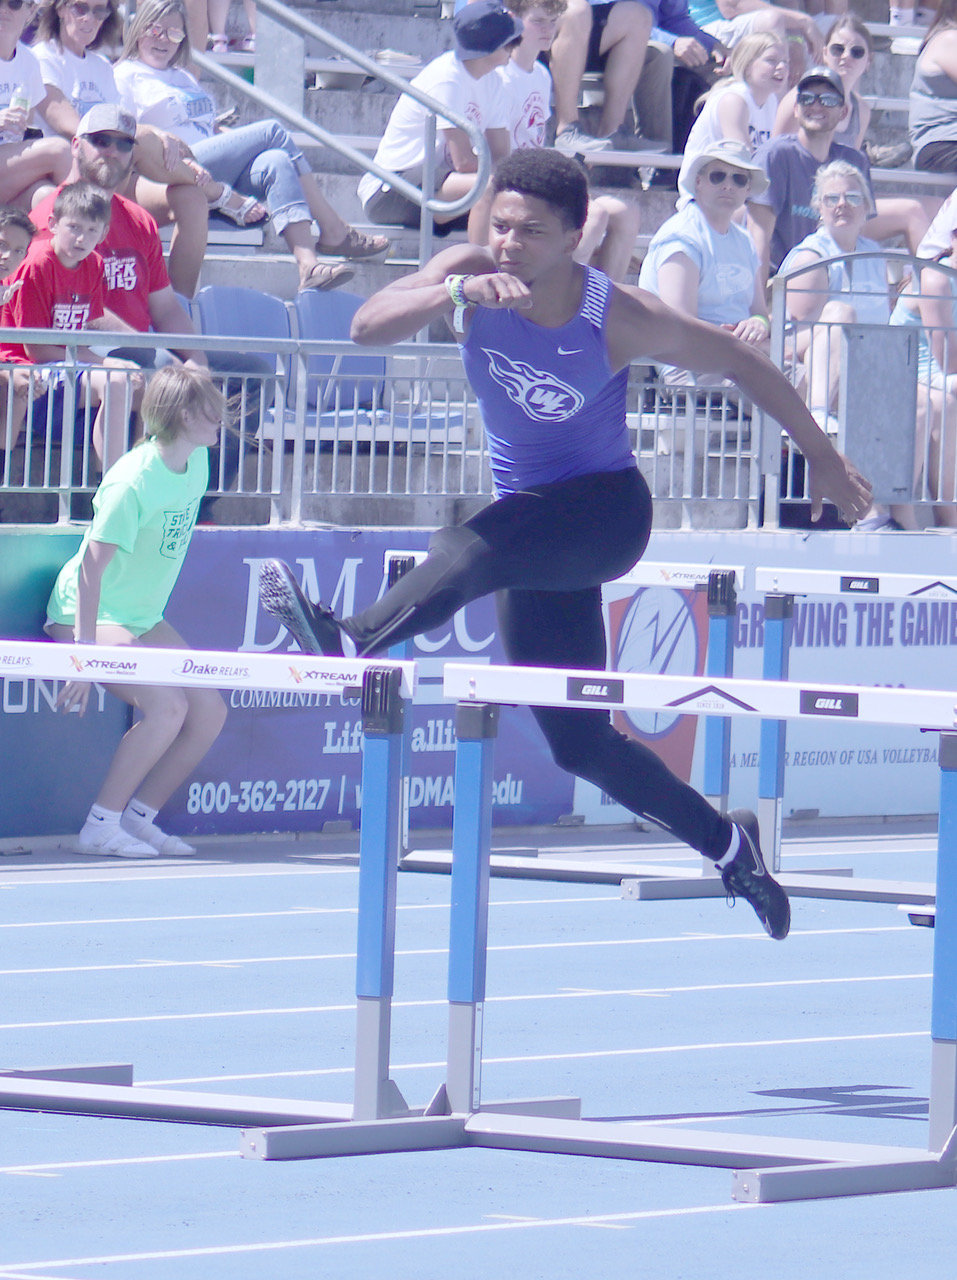 WL senior Jahsiah Galvan lifts himself over the hurdle during last week's state track meet in Des Moines in the boys shuttle hurdle relay.